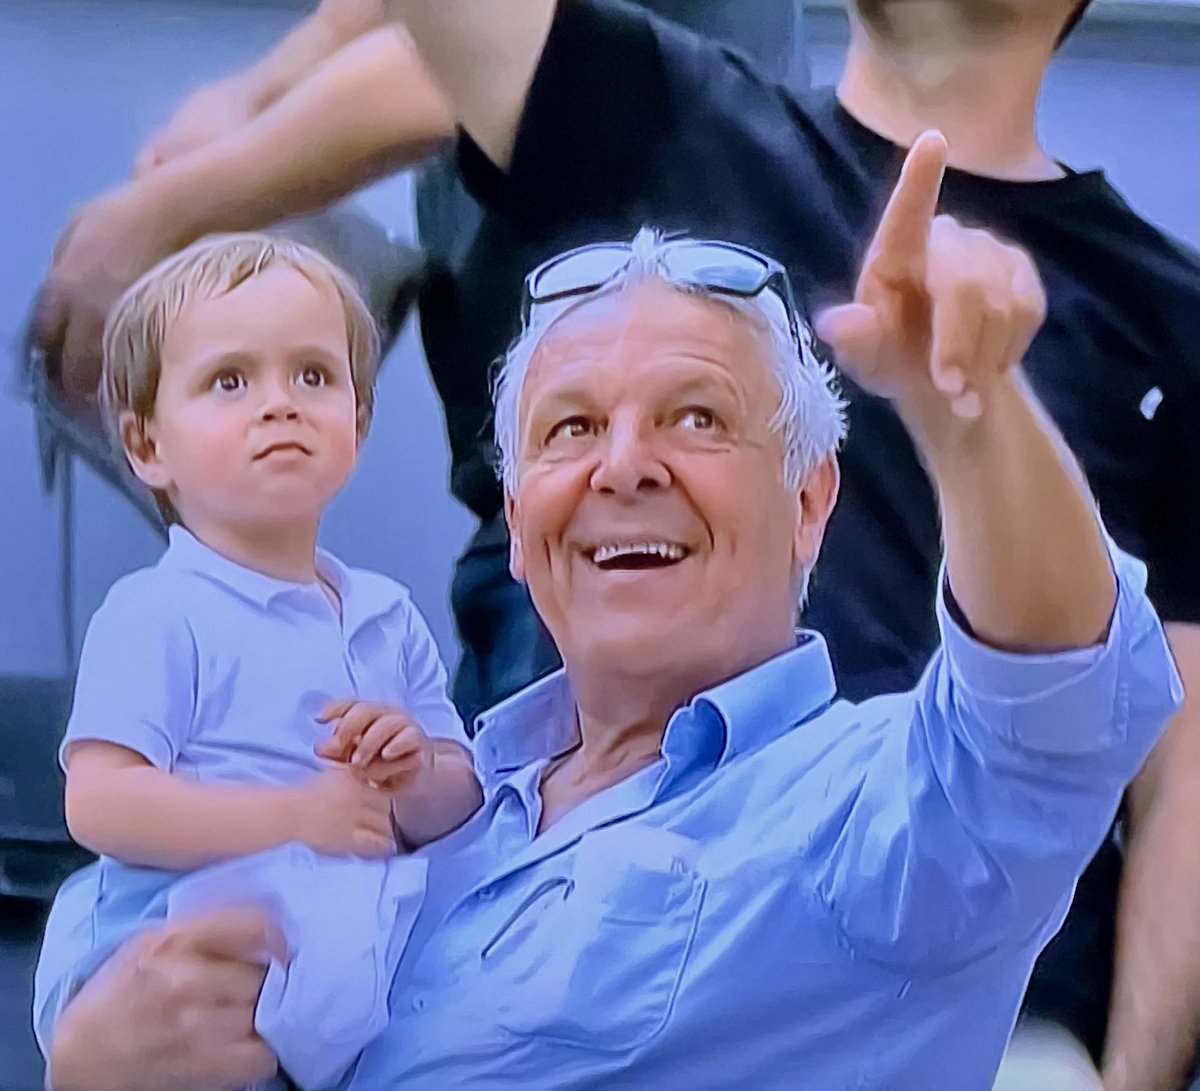 Baby Rafa is celebrating the win of his daddy with his granddaddy. So cute! 🥰😘 The 3 generations of Nadals (male) are present in Foro Italico center court of Rome. @RafaelNadal 🐐👑🥇 #ItalianOpen #TennisTV